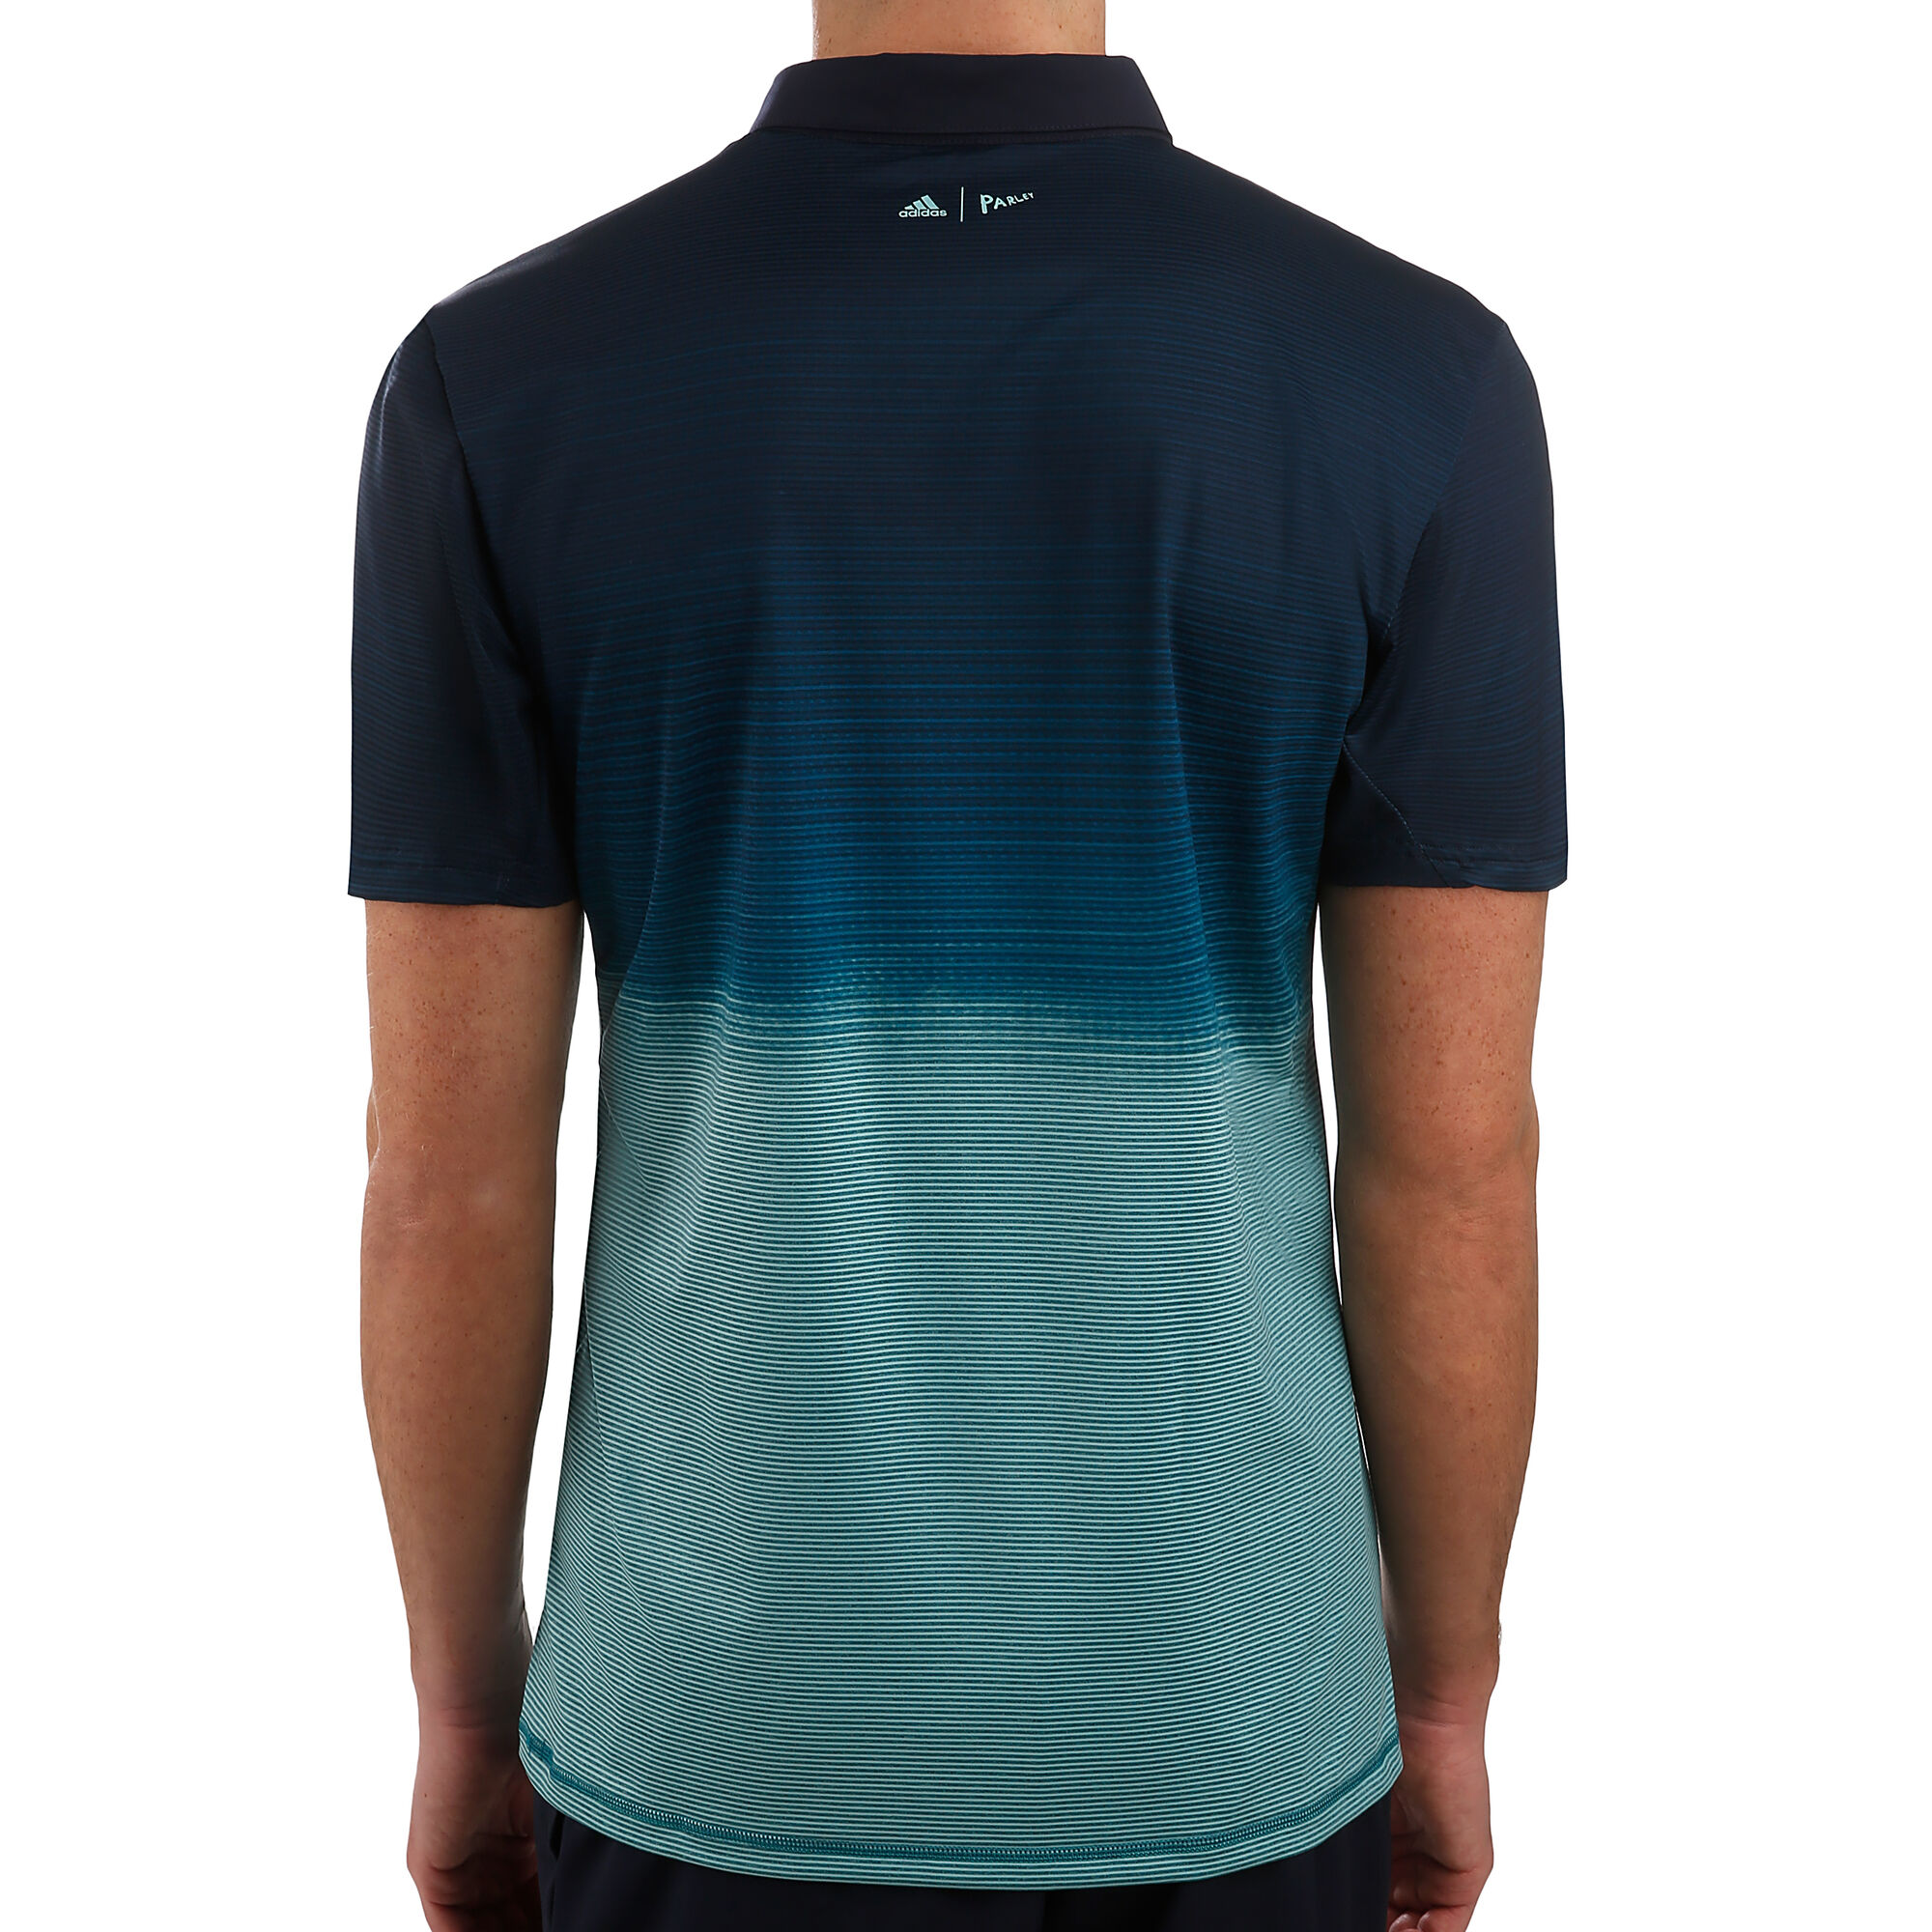 adidas Parley Polo - Oscuro, Mint compra Tennis-Point